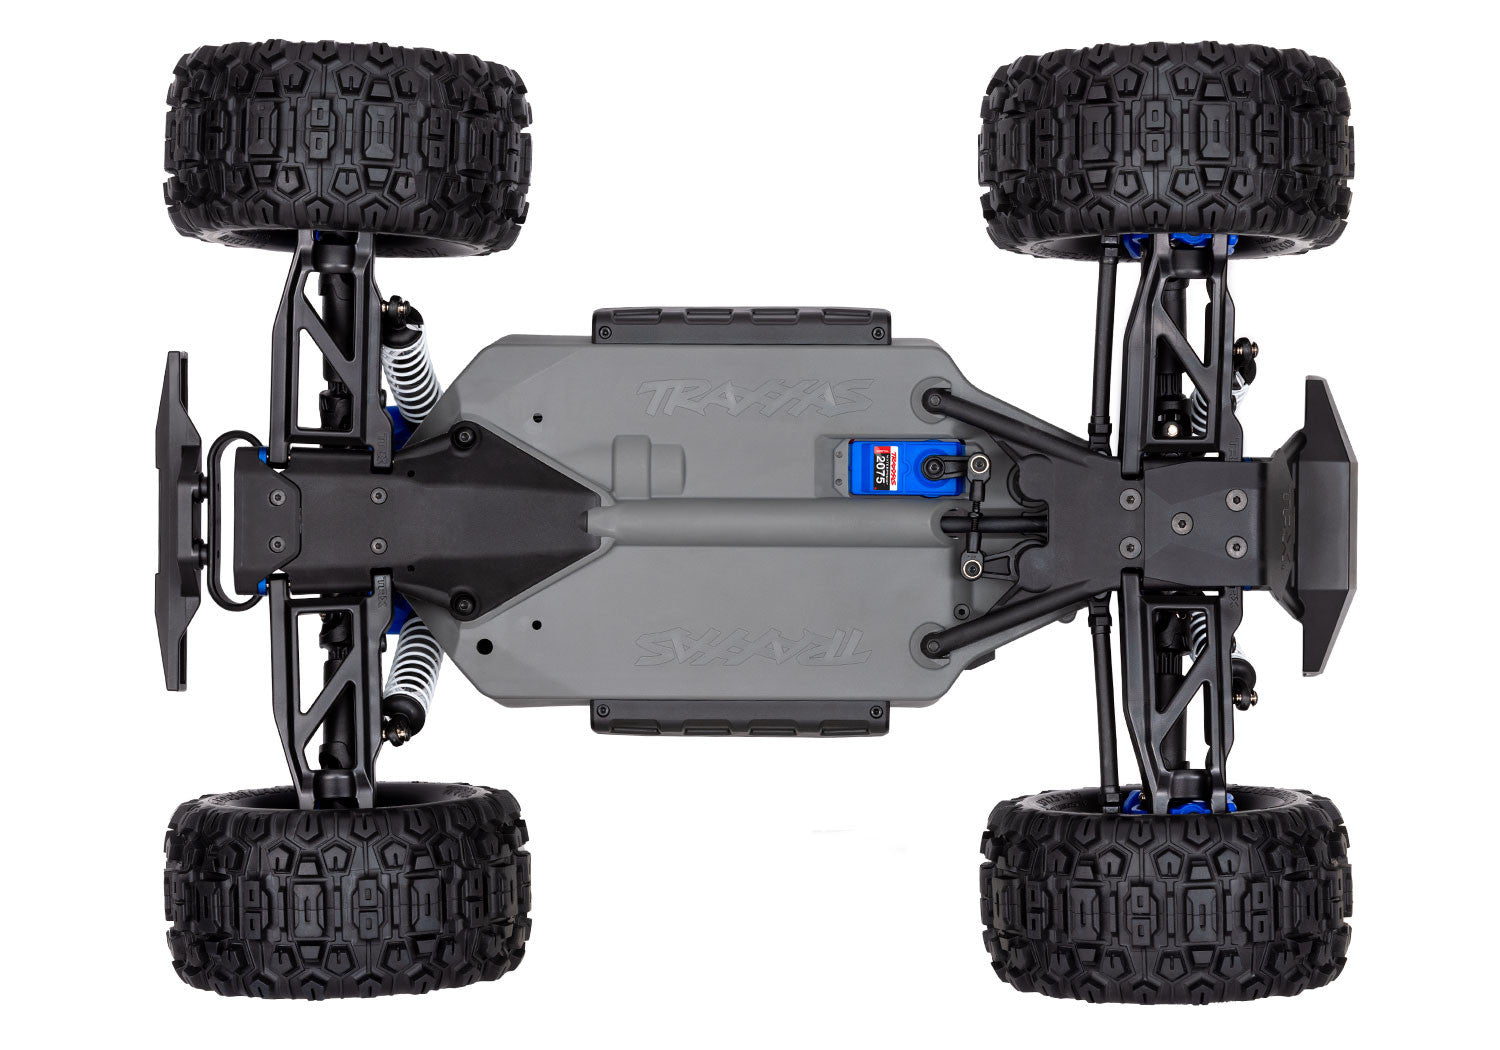 Traxxas Stampede 4x4 BL-2s RTR 67154-4